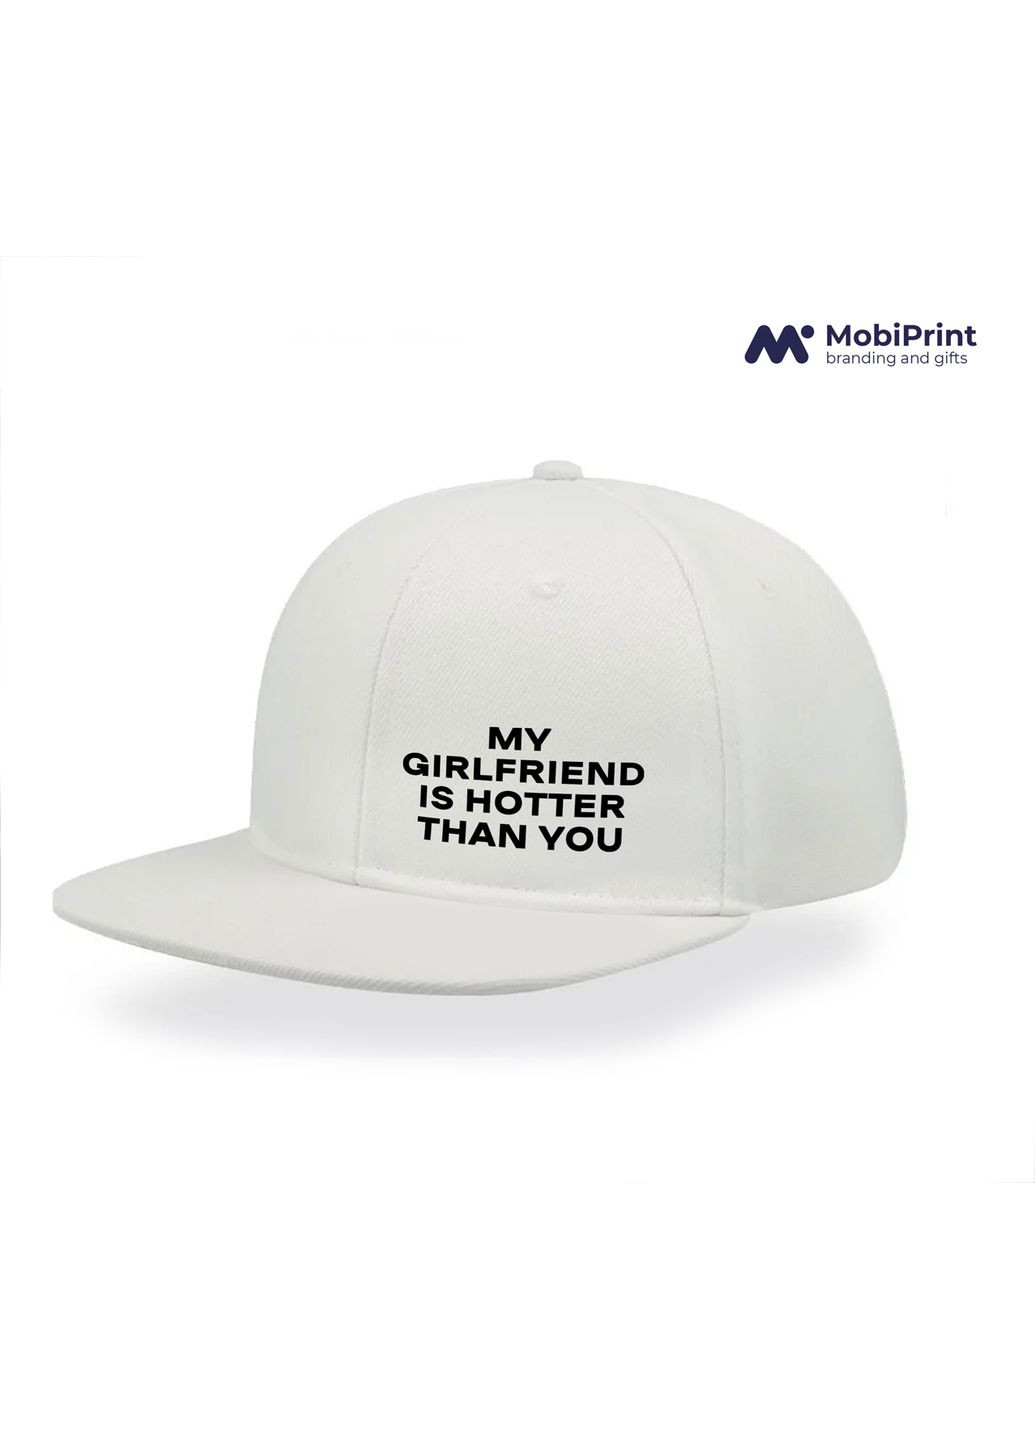 Кепка Snapback My girlfriend hotter than you Белый (9276-4092-WT) MobiPrint (292866191)